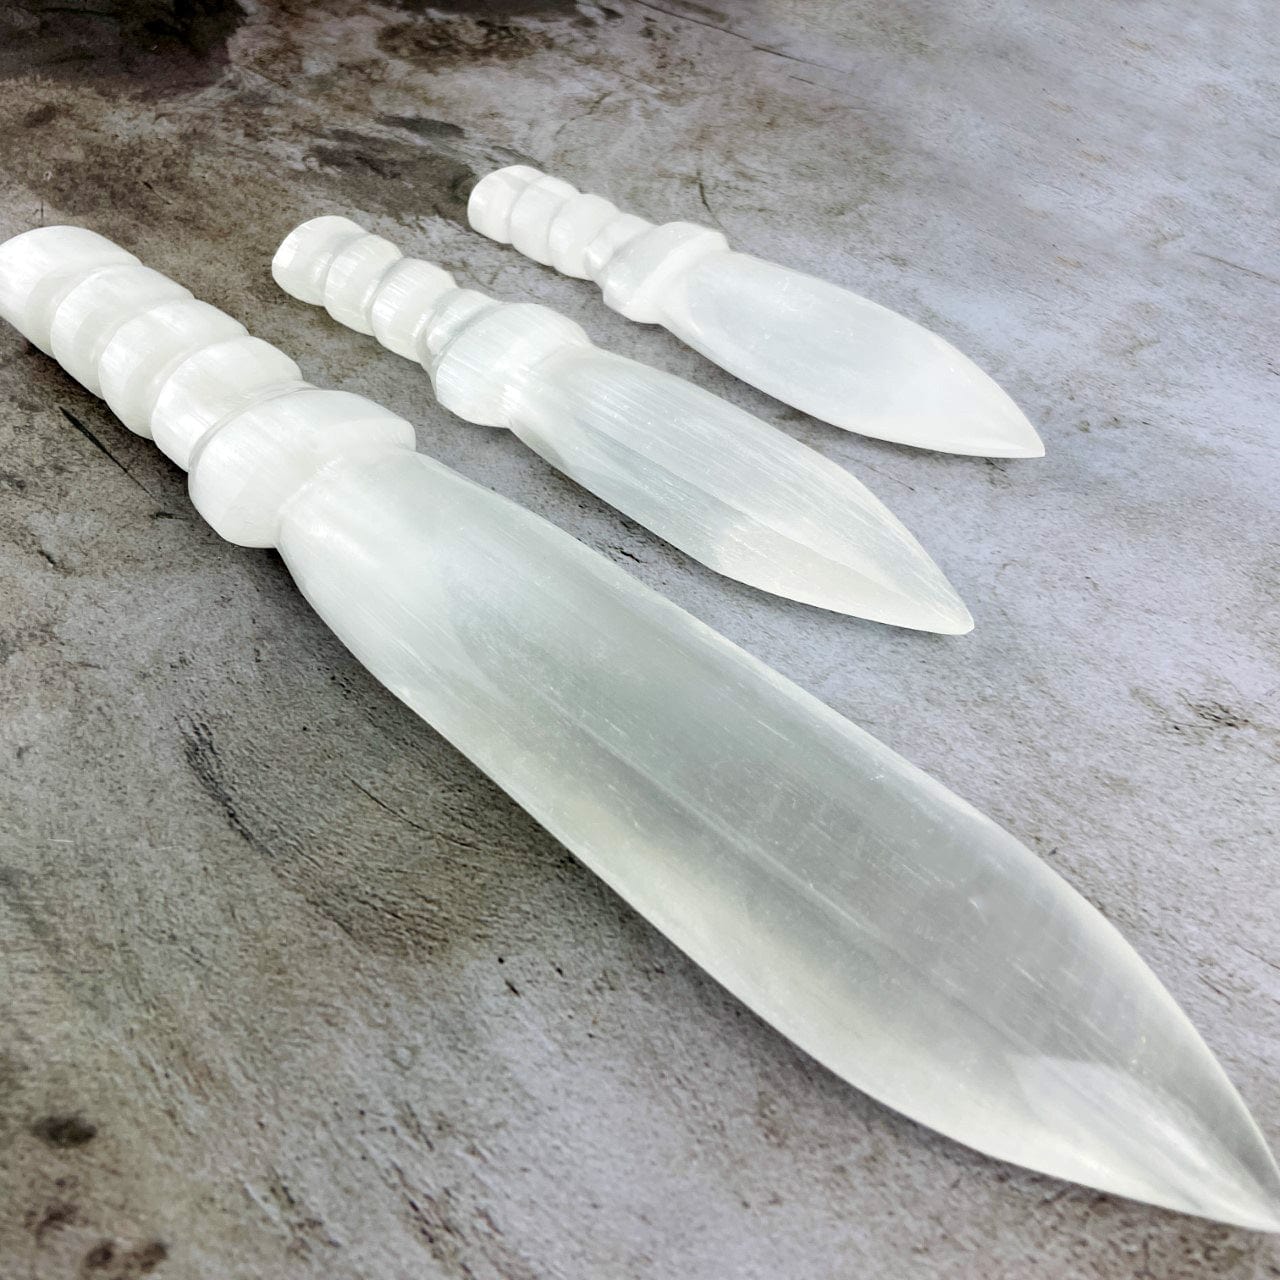 3 sizes of Selenite Knives with Twisted Handles up close